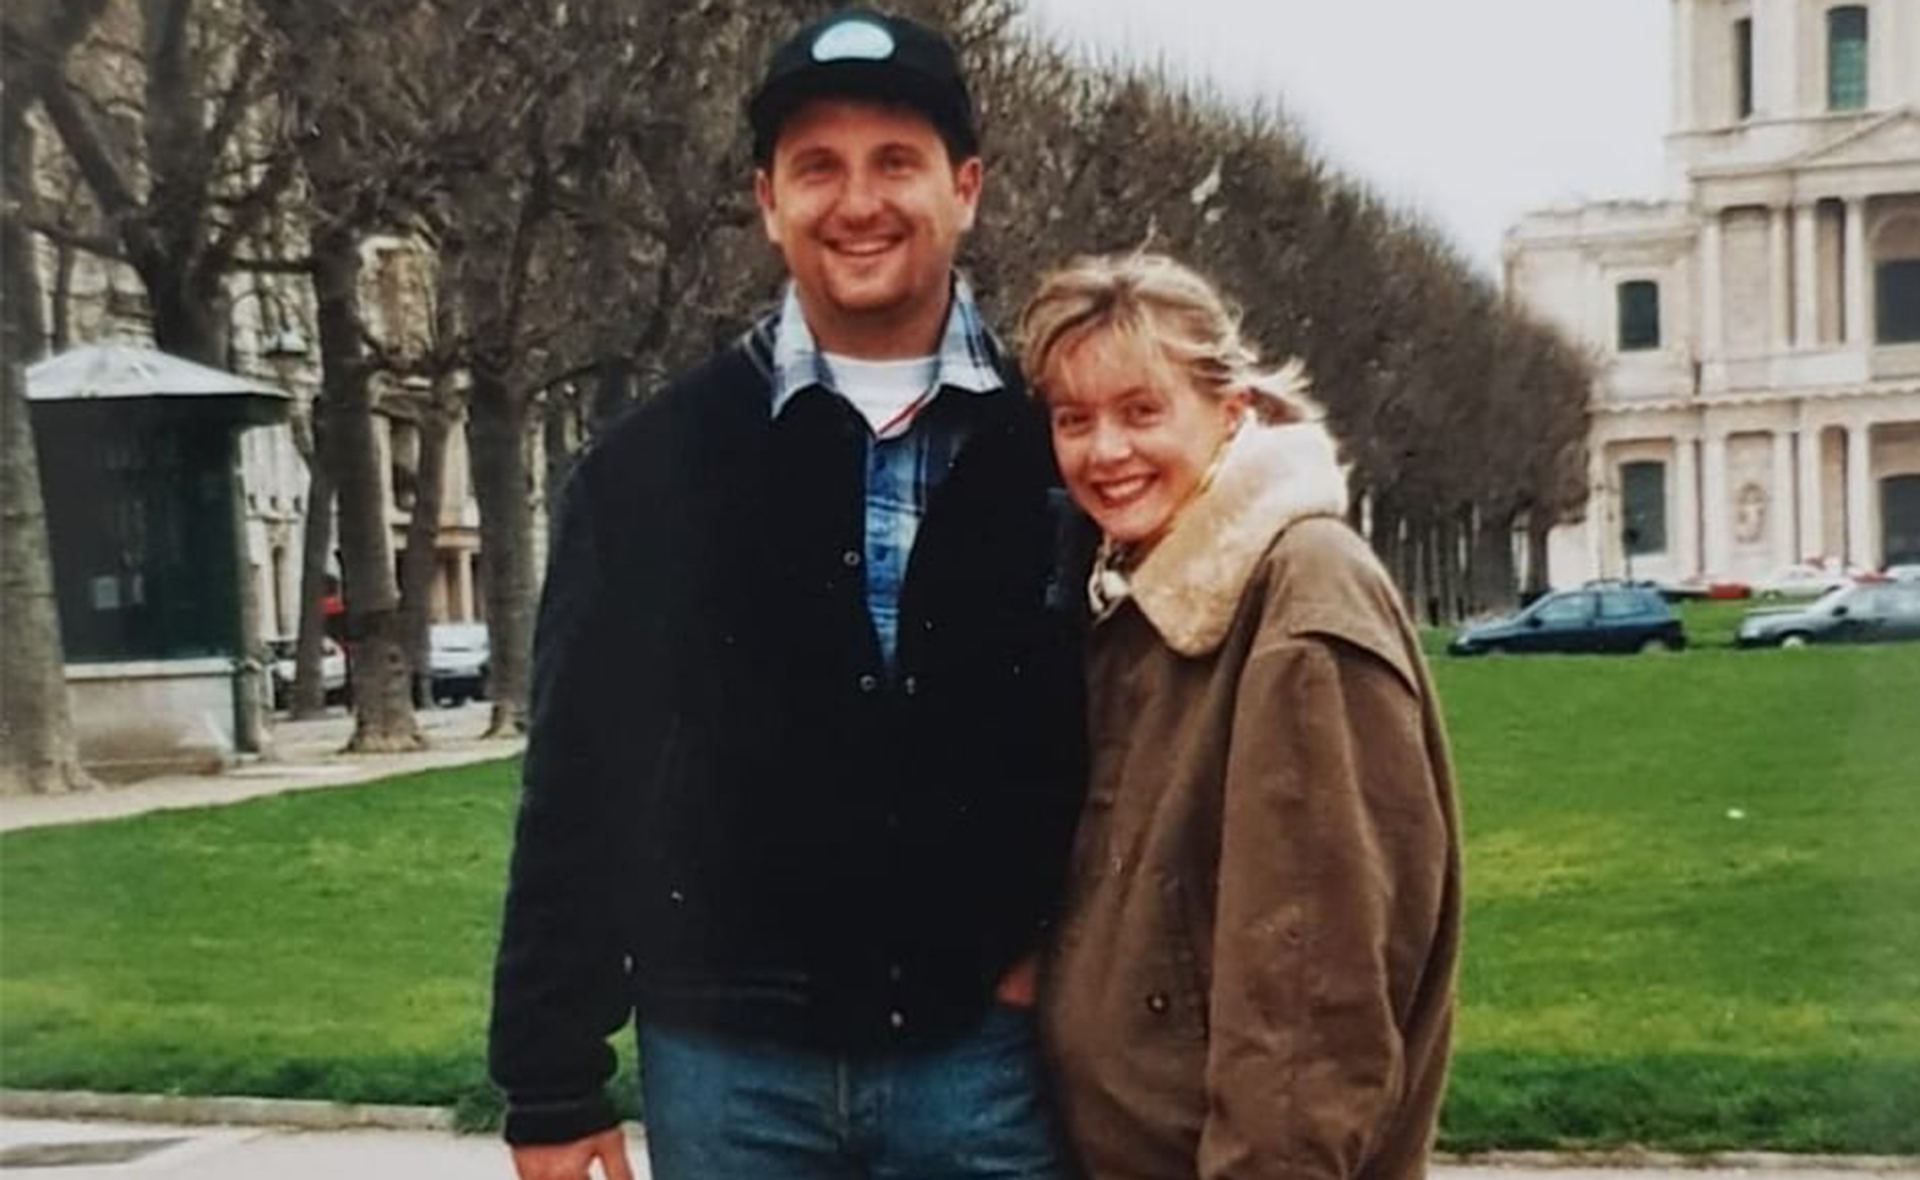 Guess who! A beloved reality TV couple shared this sweet throwback to celebrate their wedding anniversary